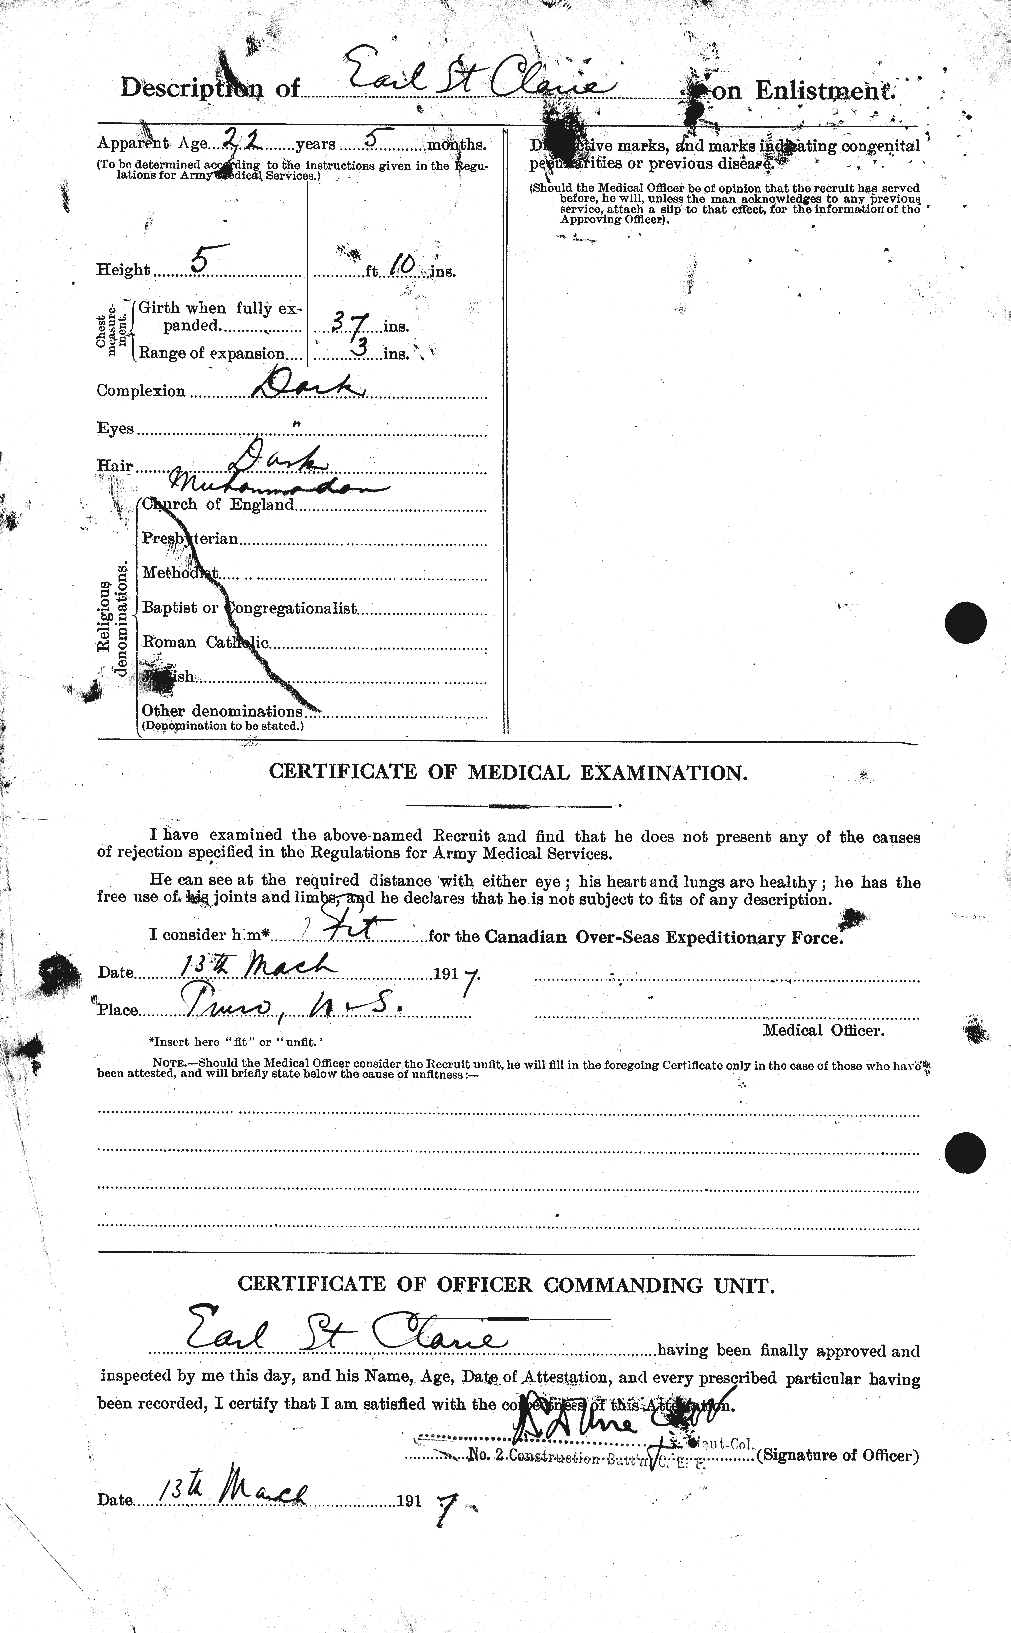 Personnel Records of the First World War - CEF 076658b